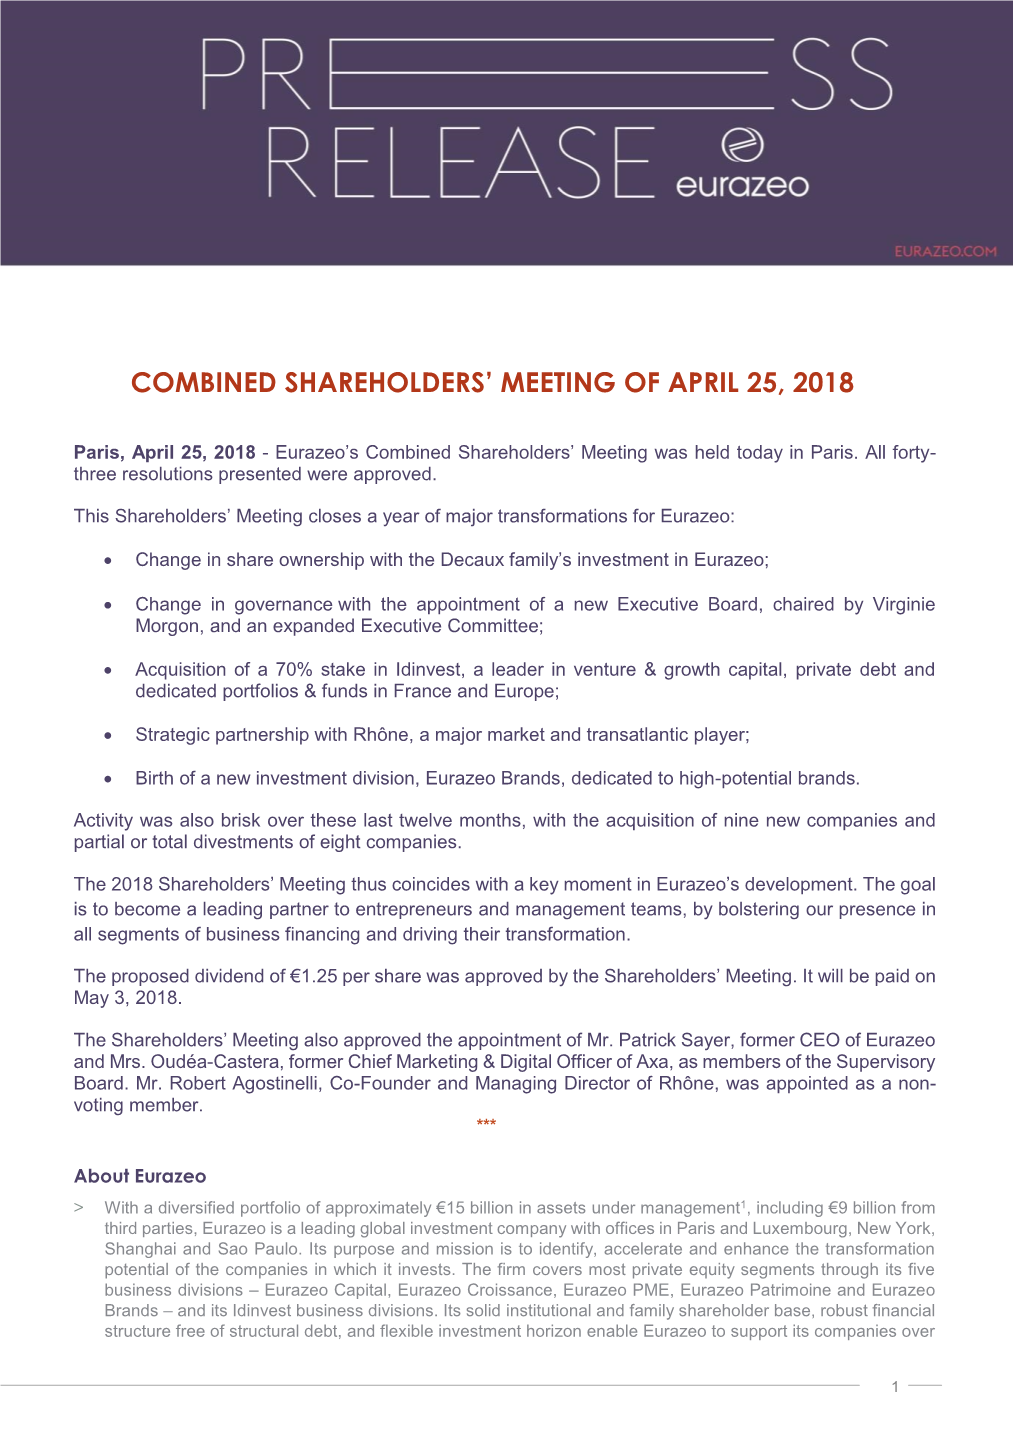 Combined Shareholders' Meeting of April 25, 2018